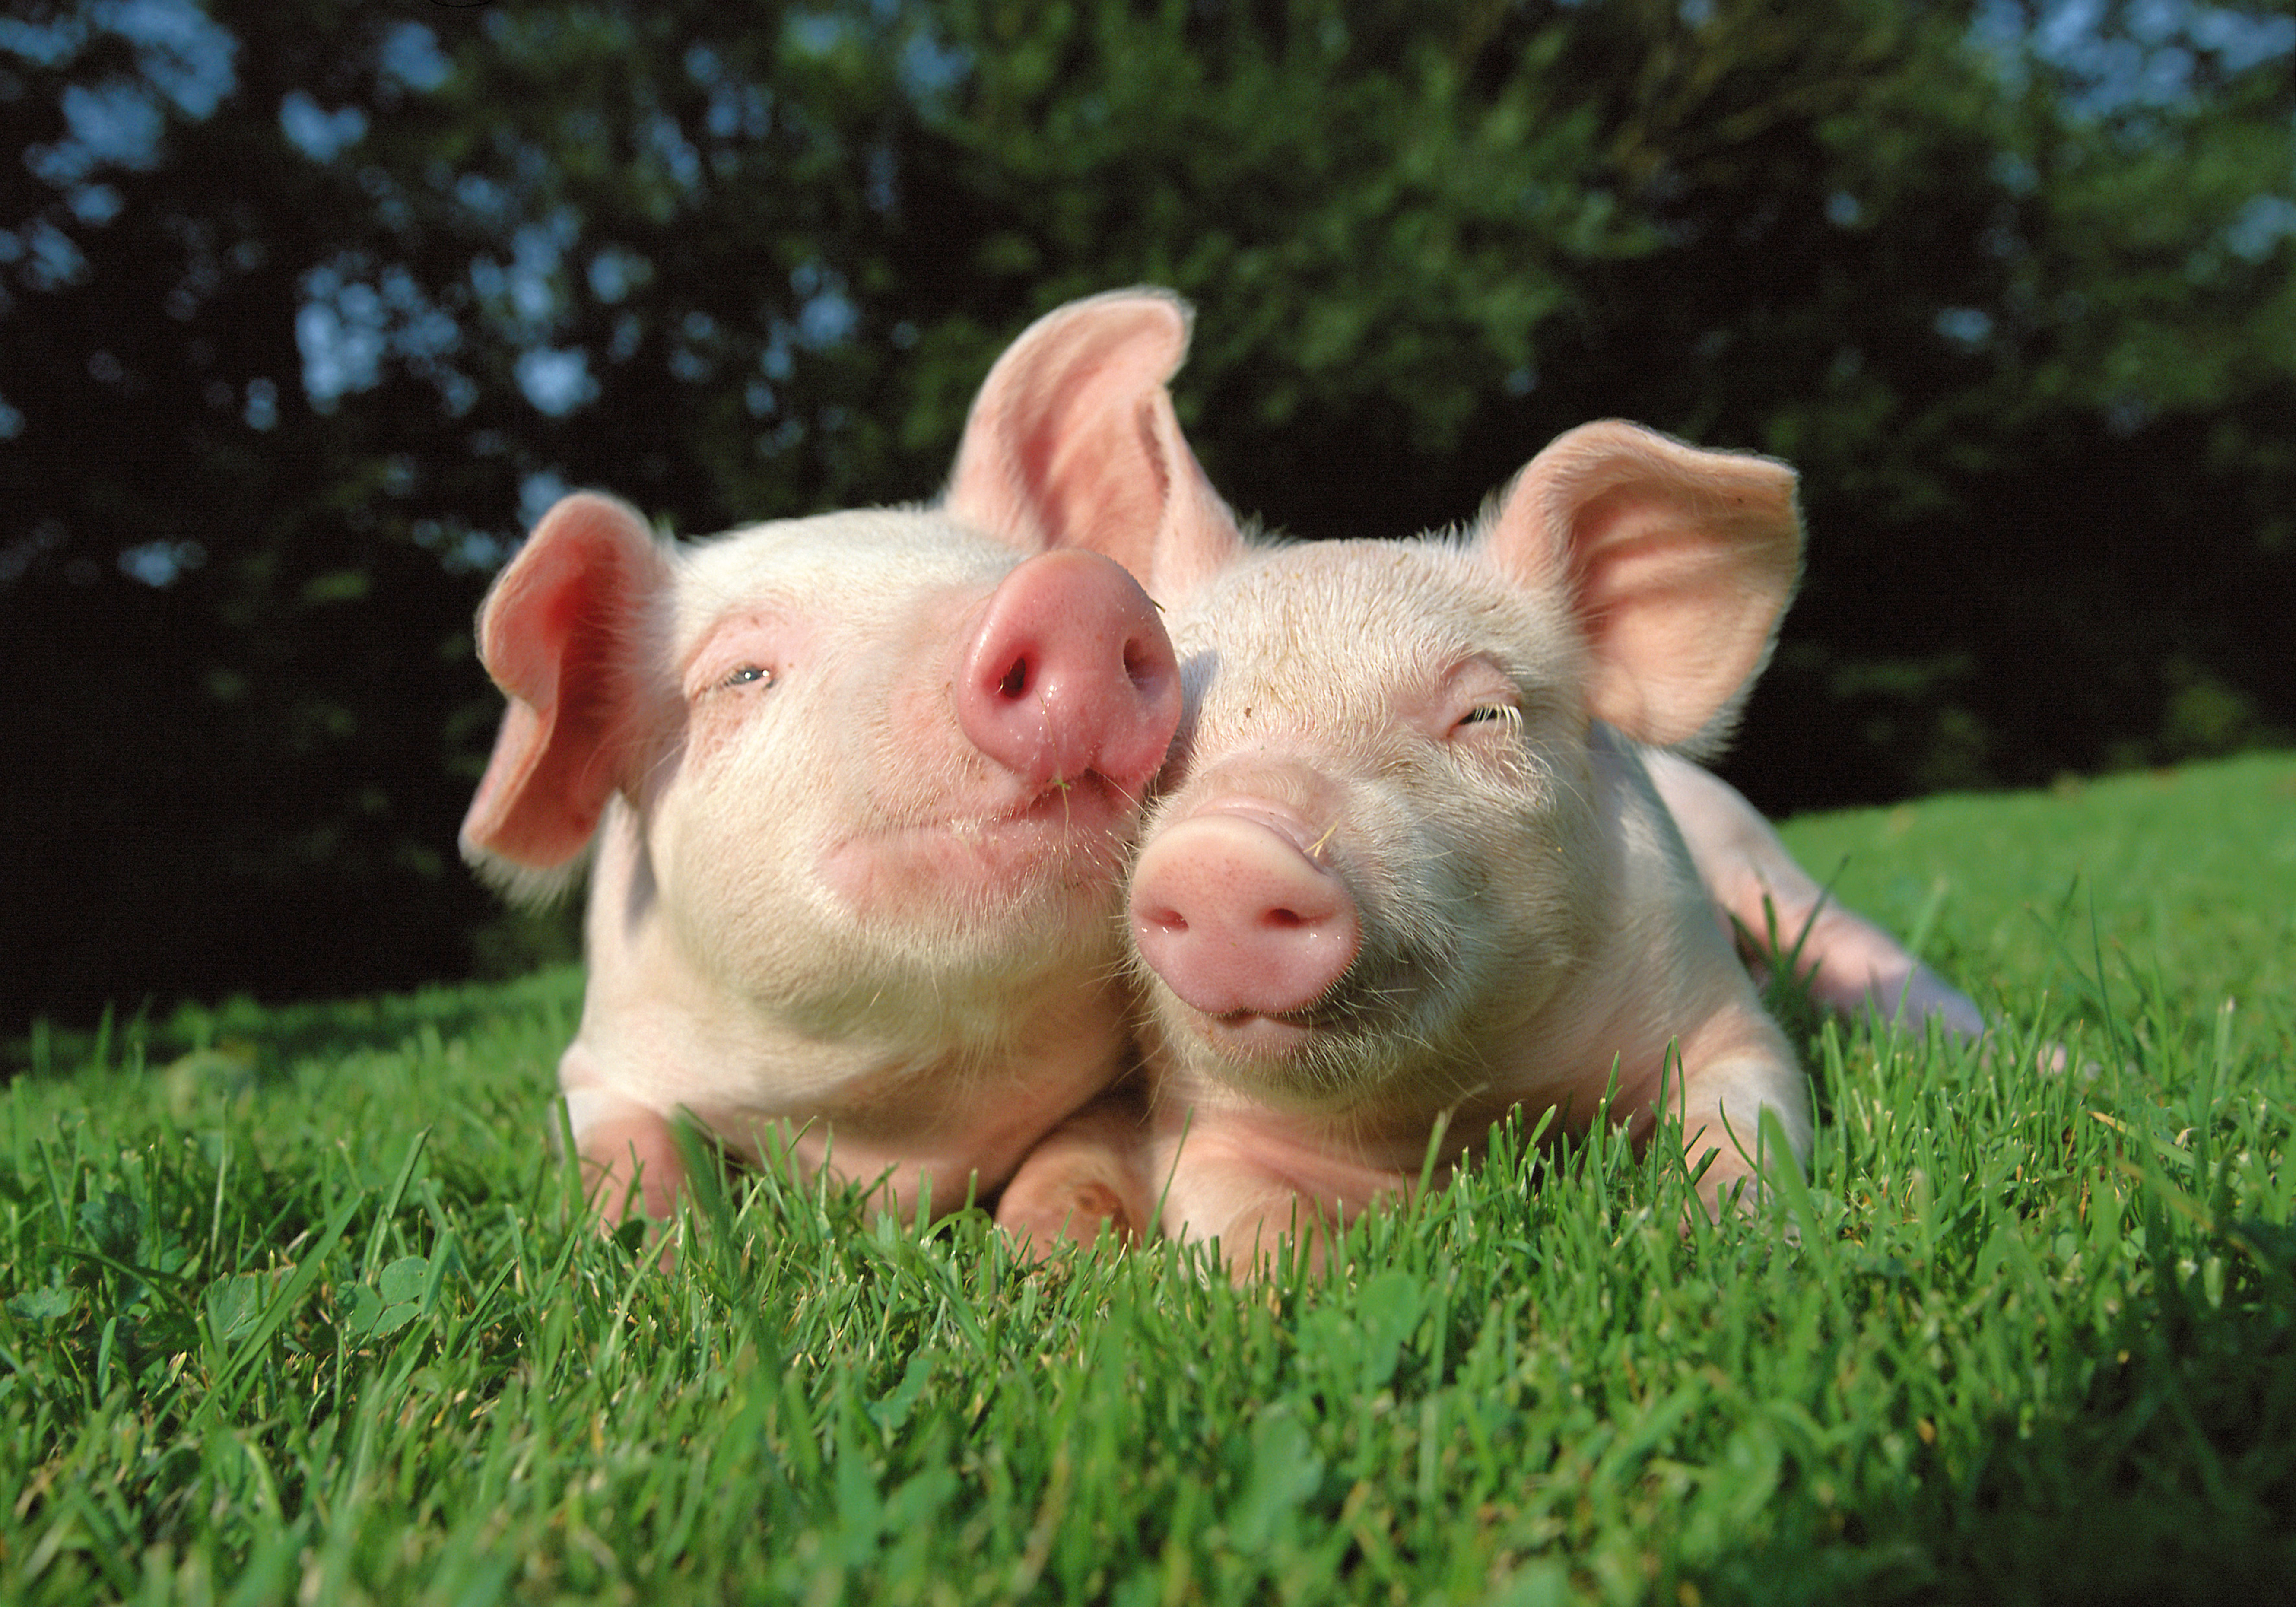 Cute pigs wallpapers and images   wallpapers pictures photos 5315x3720